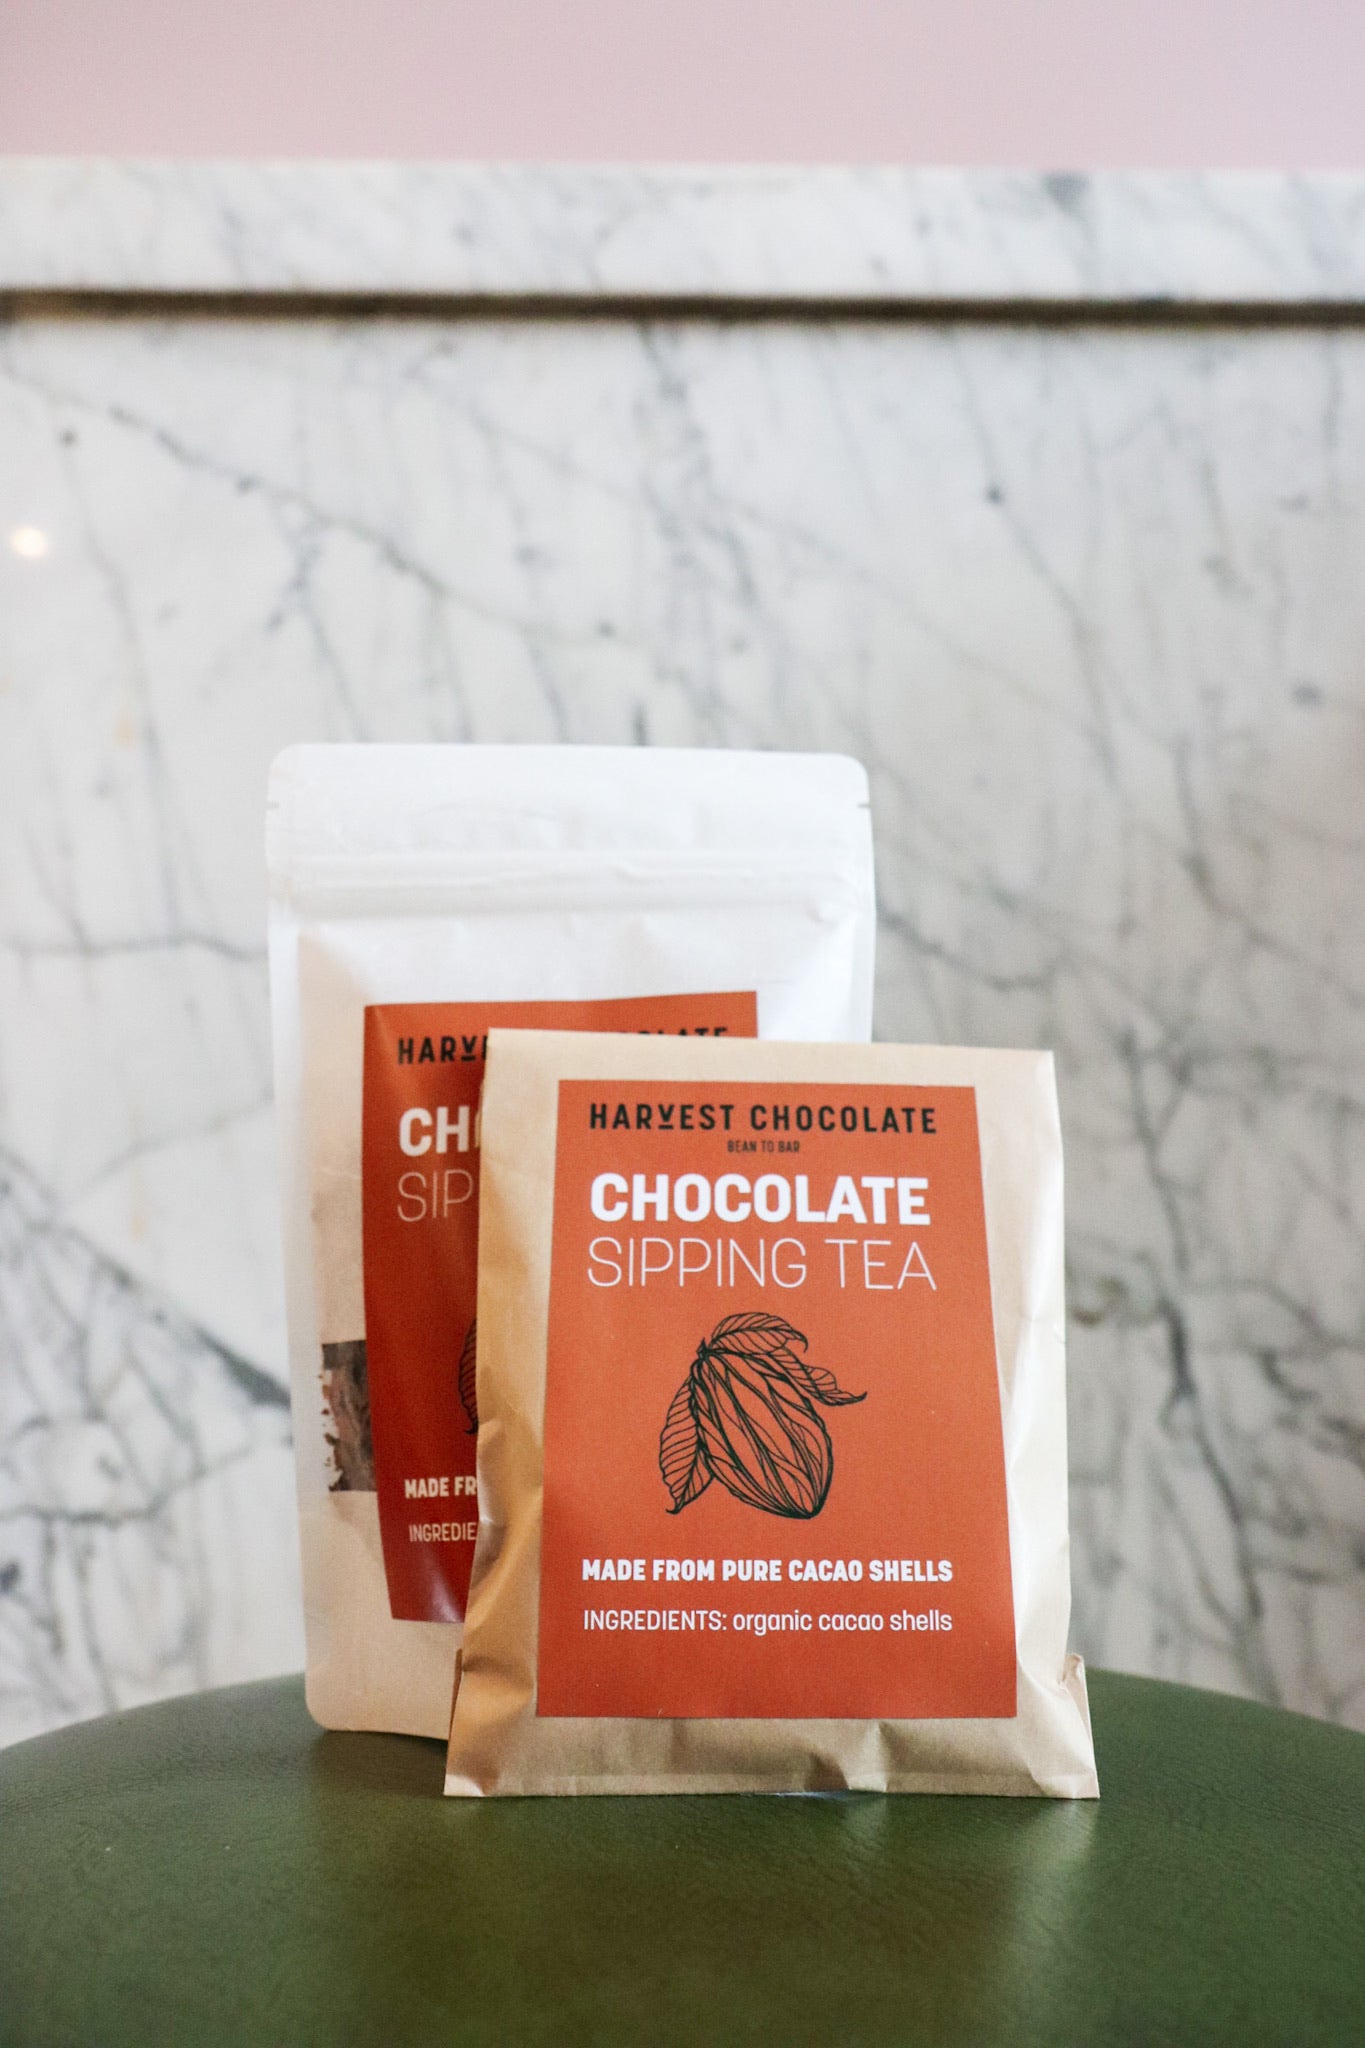 Two packages of Harvest Chocolate Chocolate Tea on a green surface with a marble wall in the background. The packages are labeled and list ingredients including organic cocoa shells.